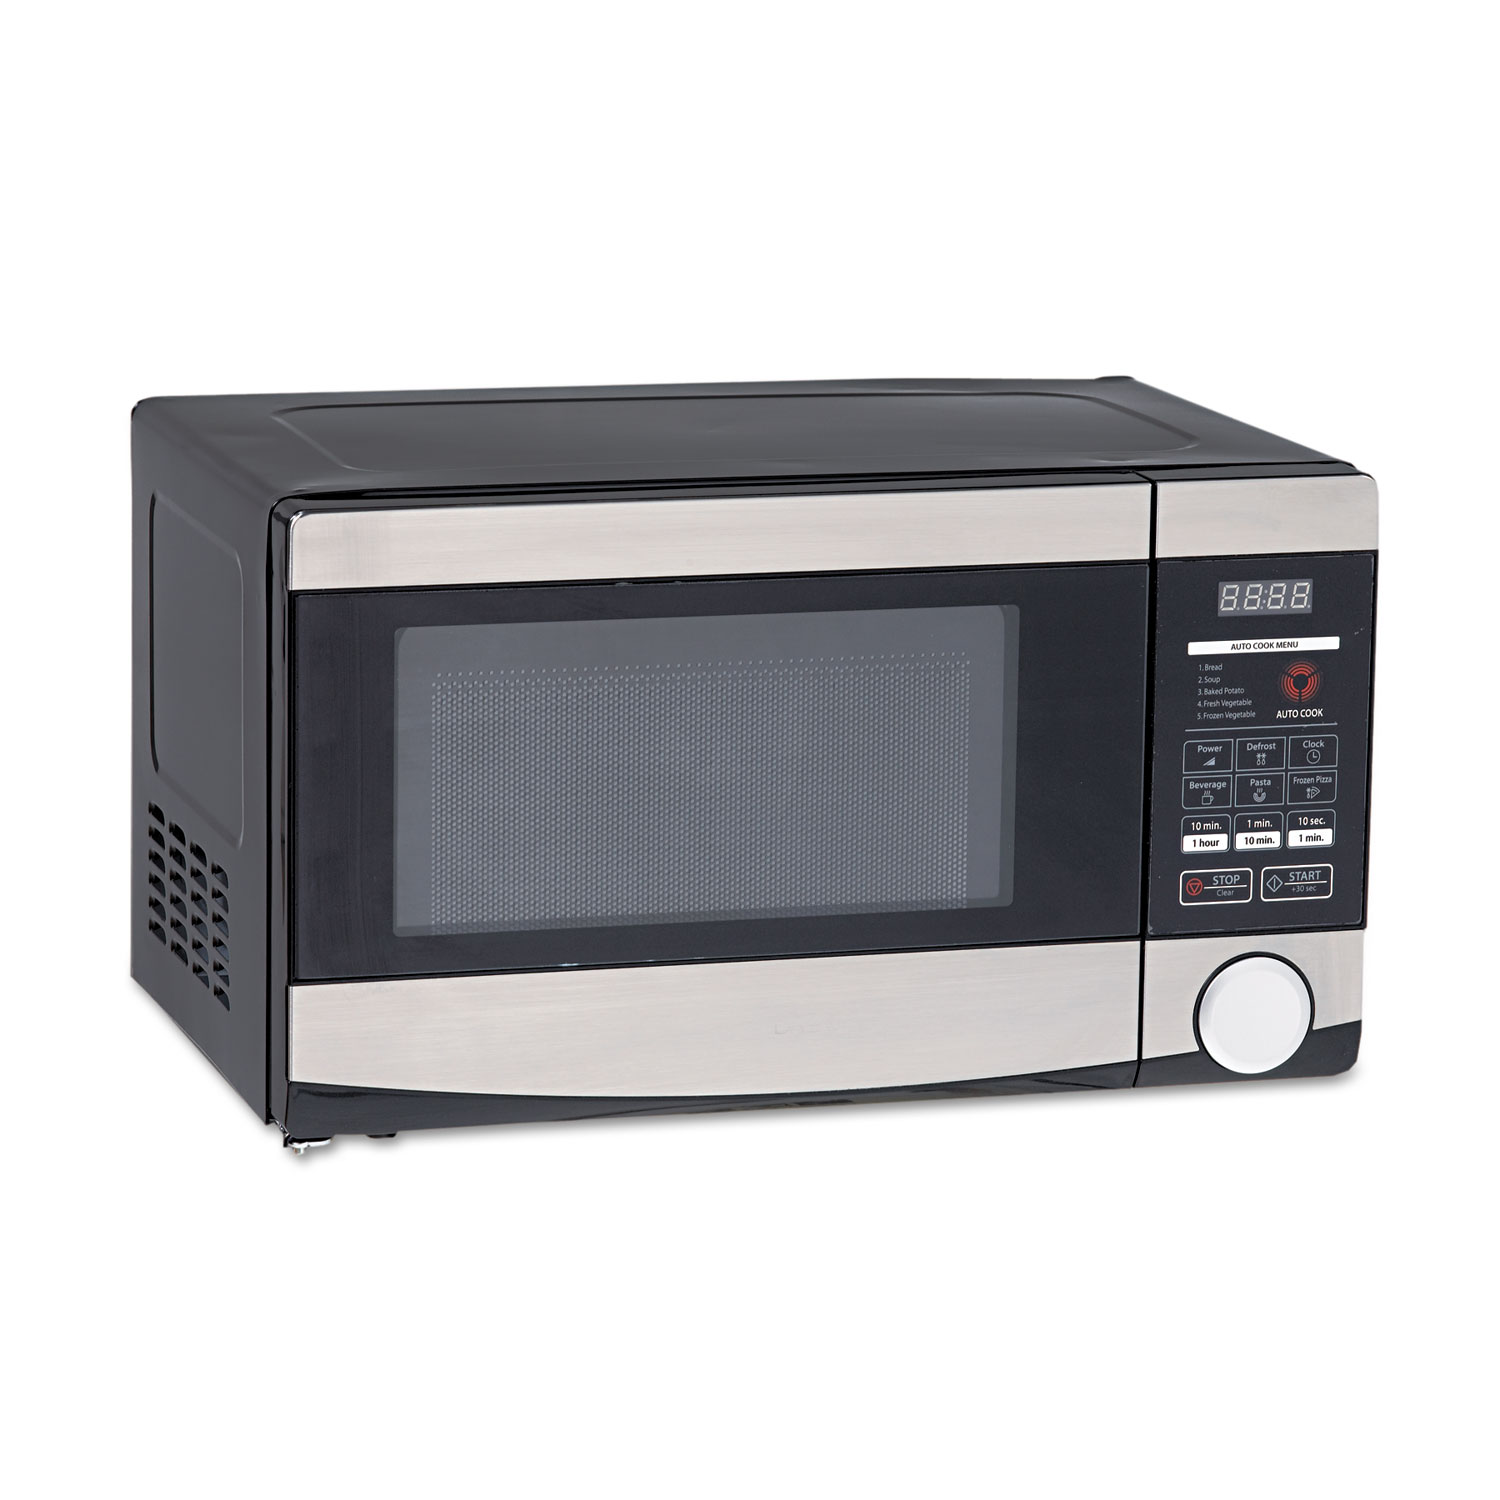  Avanti MO7103SST 0.7 Cu.ft Capacity Microwave Oven, 700 Watts, Stainless Steel and Black (AVAMO7103SST) 